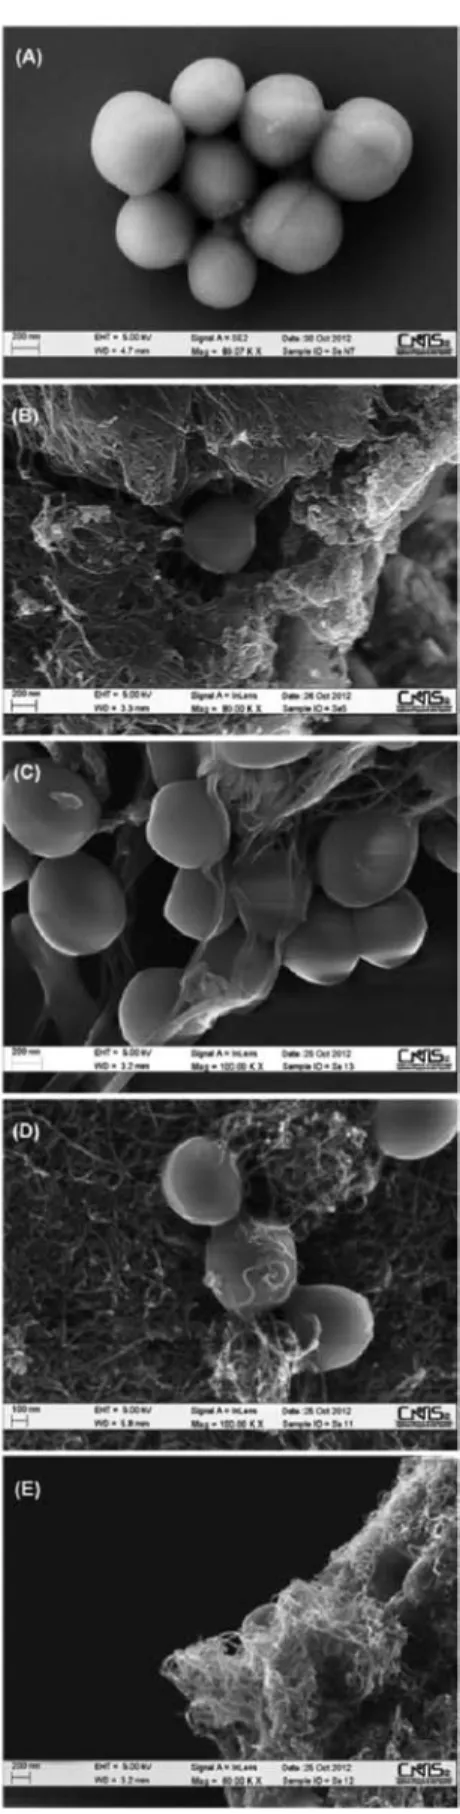 Fig. 4 SEM images of Staphylococcus aureus cells after incubation with PBS for 24 h (A) and bacteria after exposure for 24 h with SWCNTs (B), r-MWCNTs (C),  a-MWCNTs (D) or DWCNTs (E) suspensions (100 mg ml 1 ).